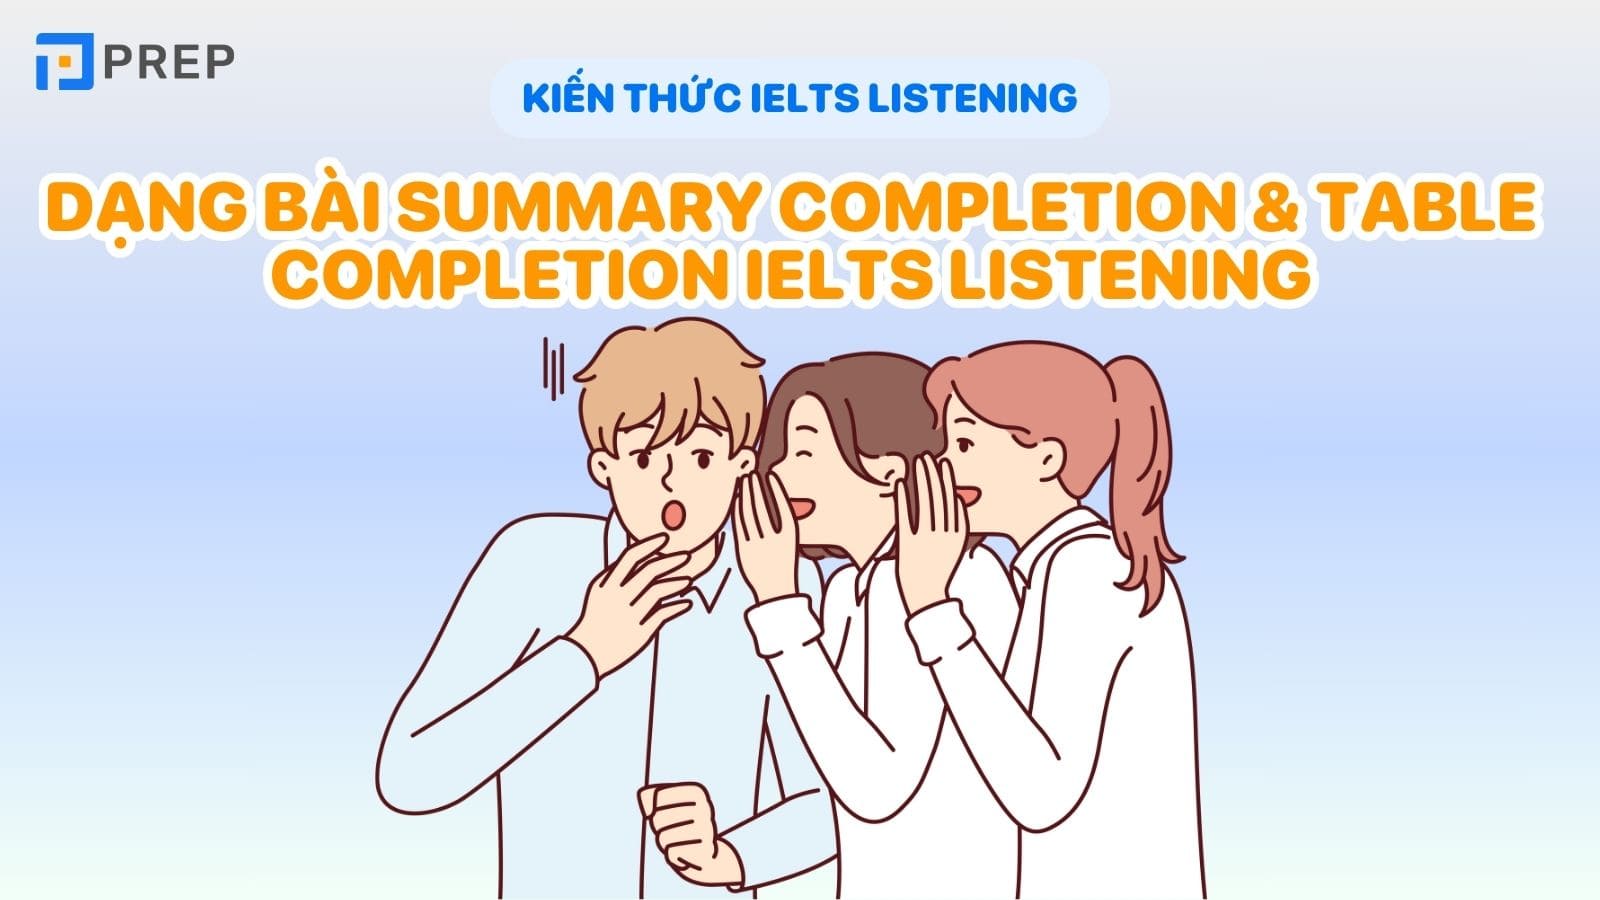 dang-bai-summary-completion-table-completion-ielts-listening.jpg